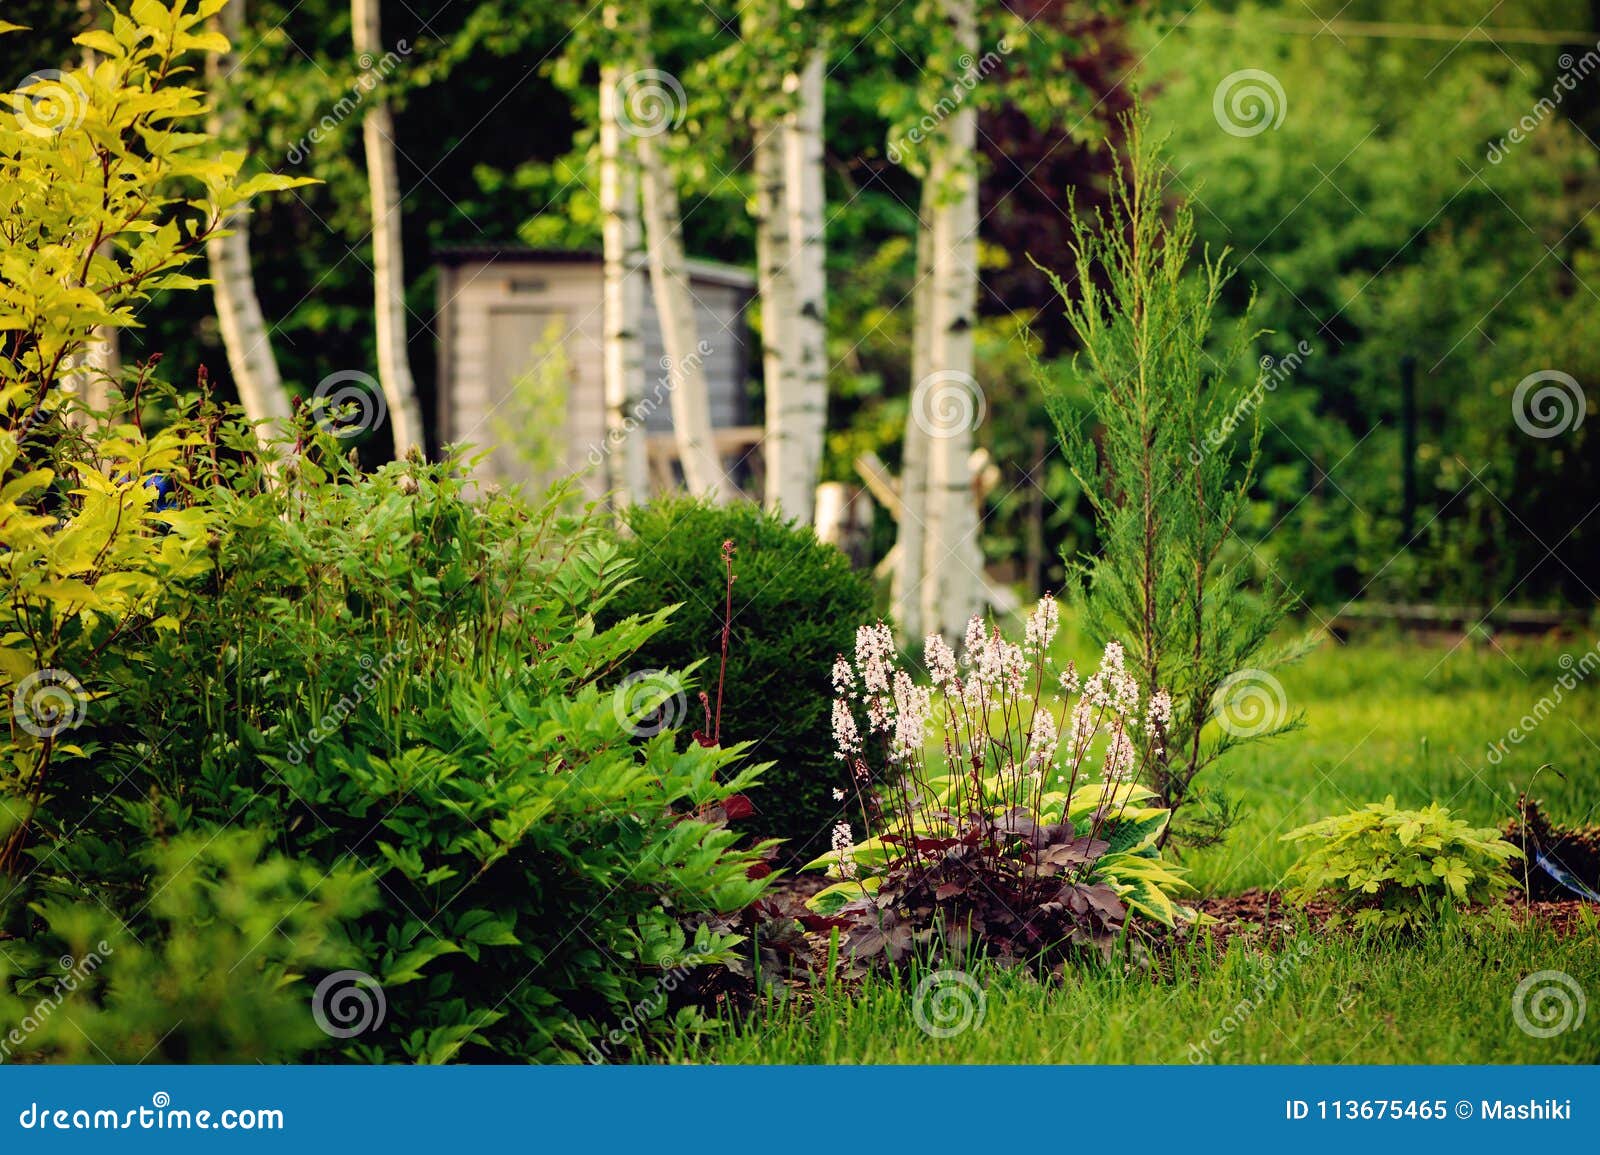 summer garden view with conifers, perennial and birch trees